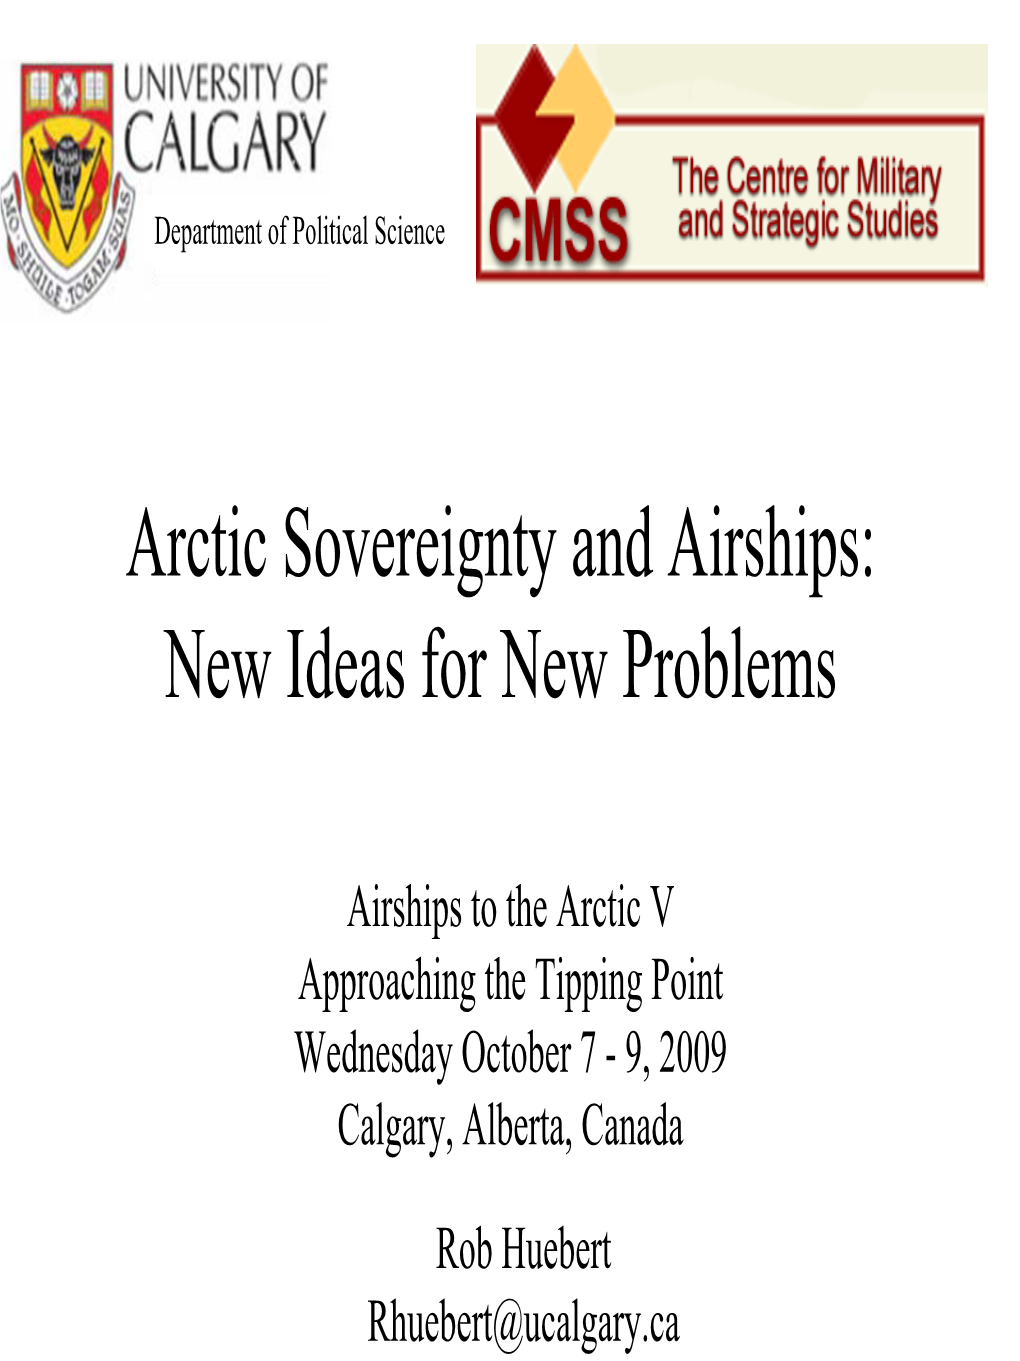 Arctic Sovereignty and Airships: New Ideas for New Problems